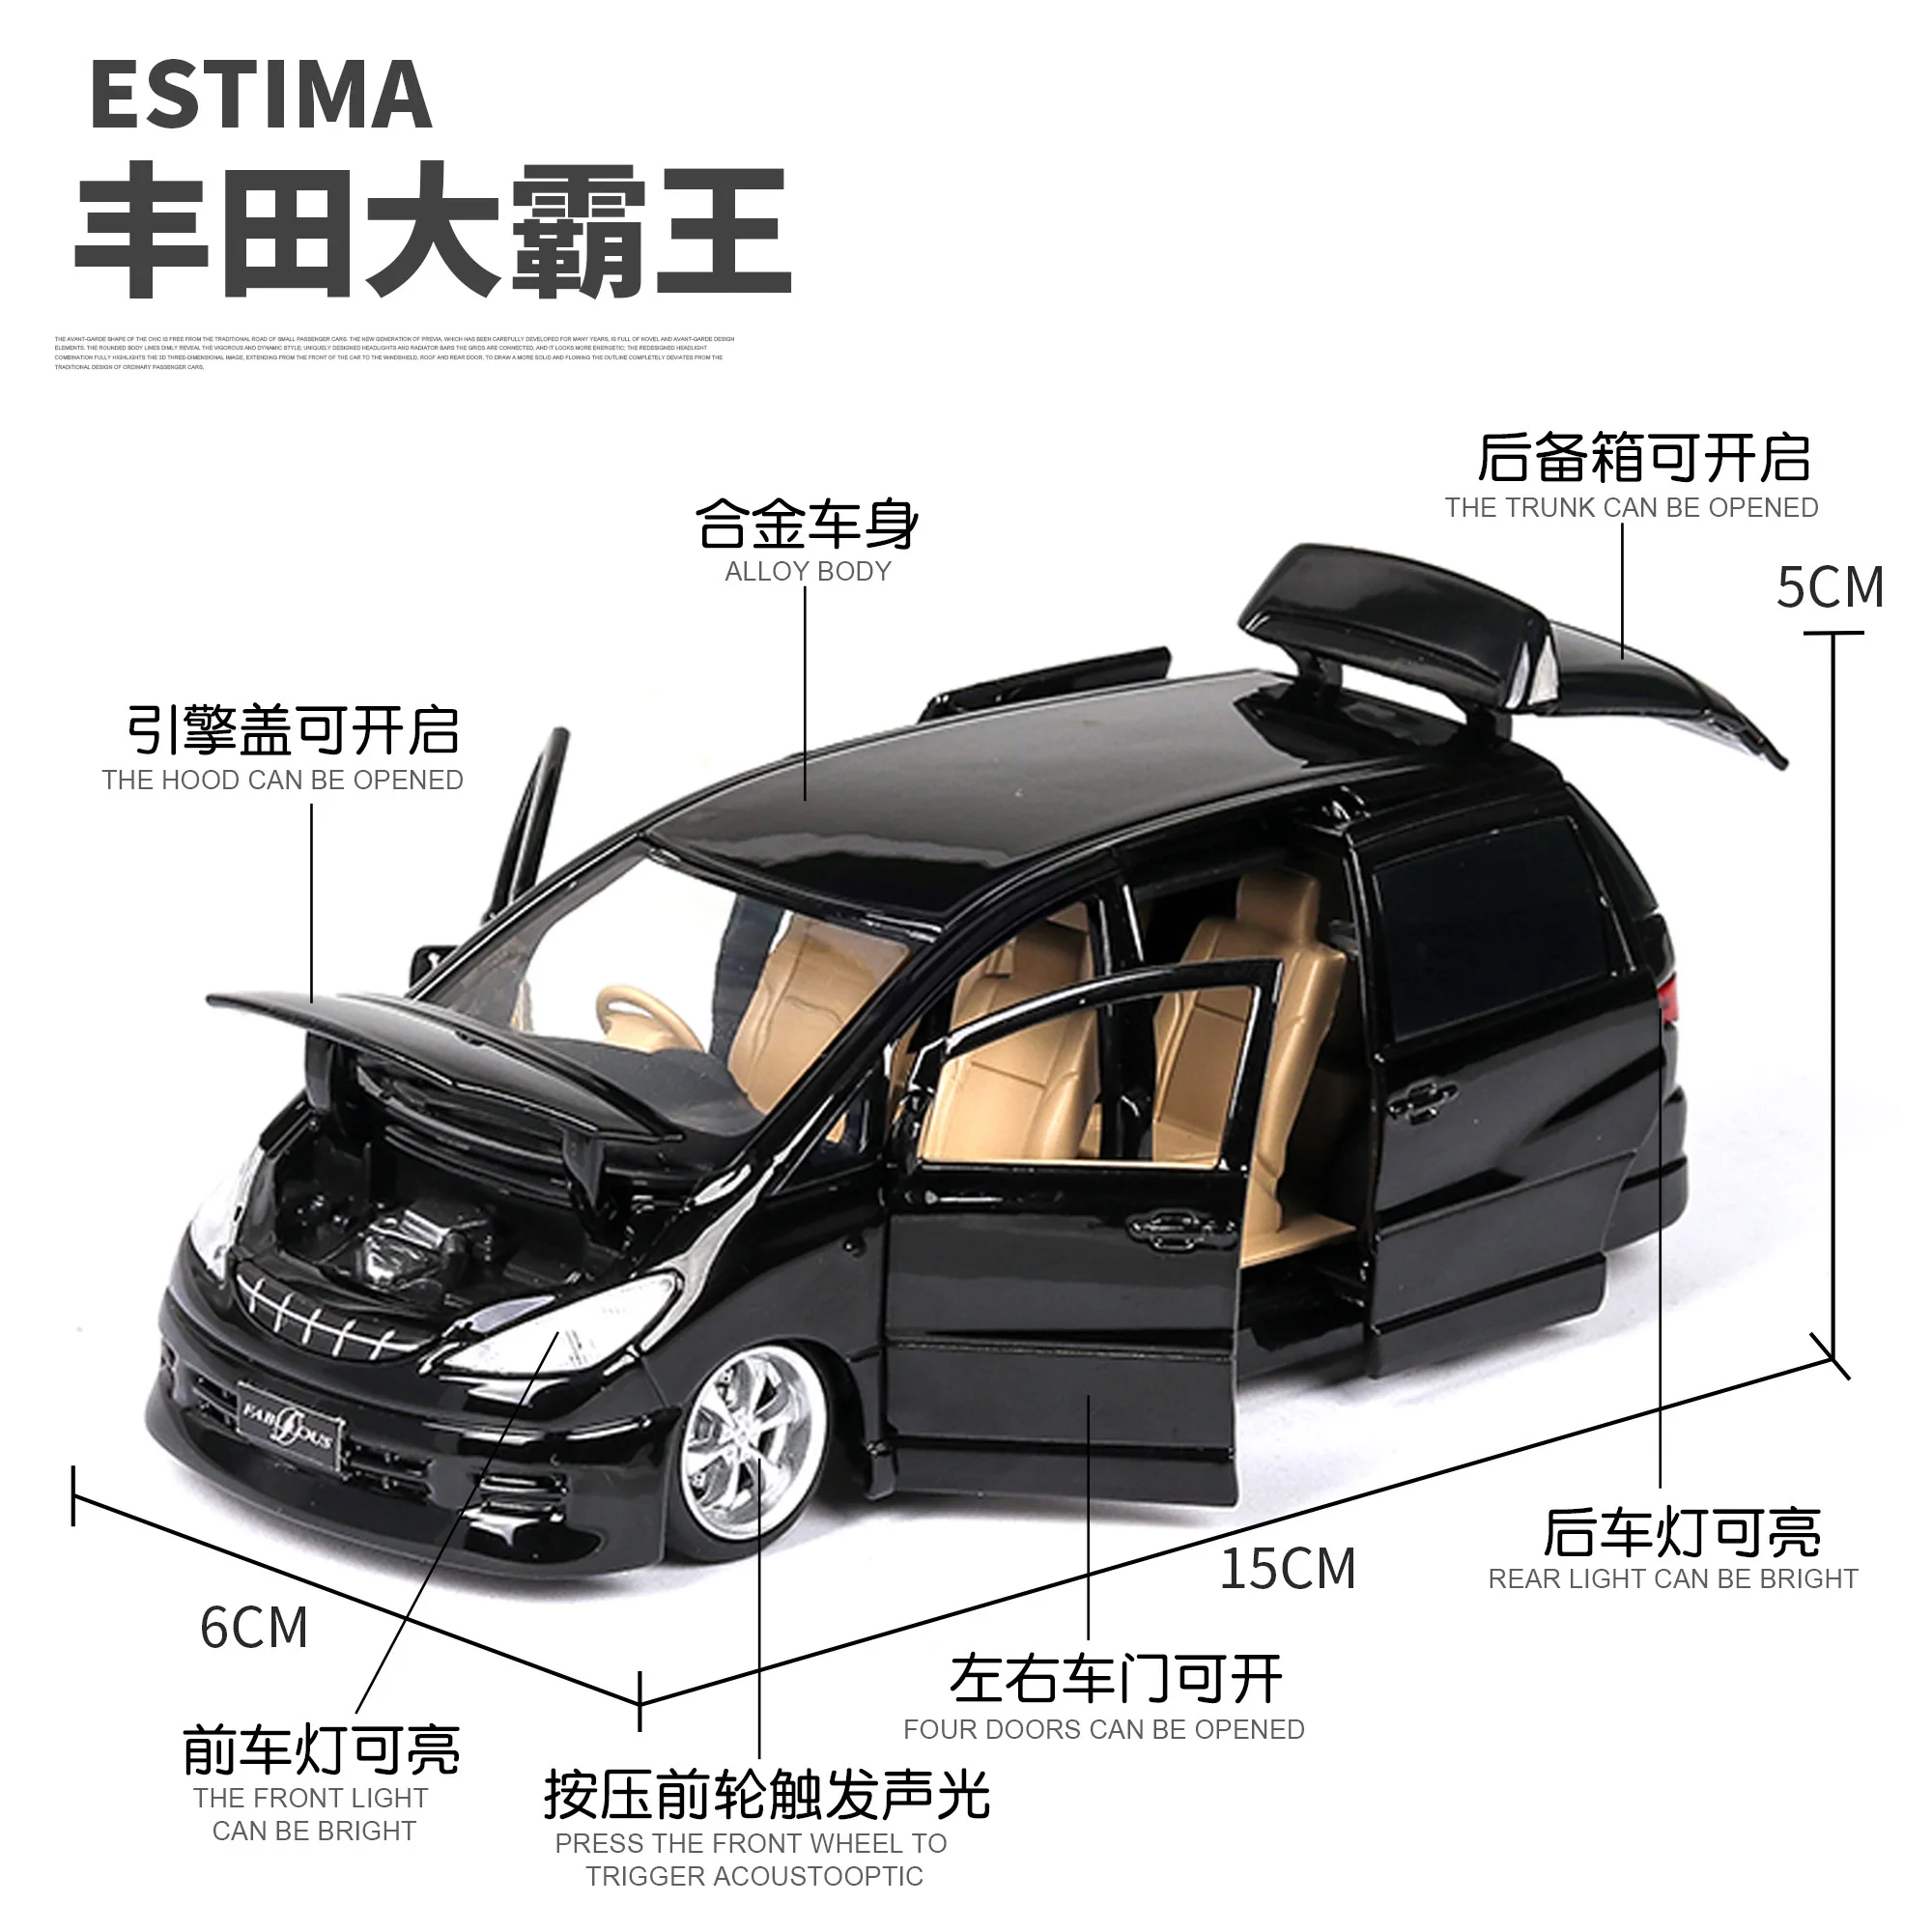 1:32 TOYOTA ESTIMA Alloy Car Model Diecasts Toy Educational Toys for Children 